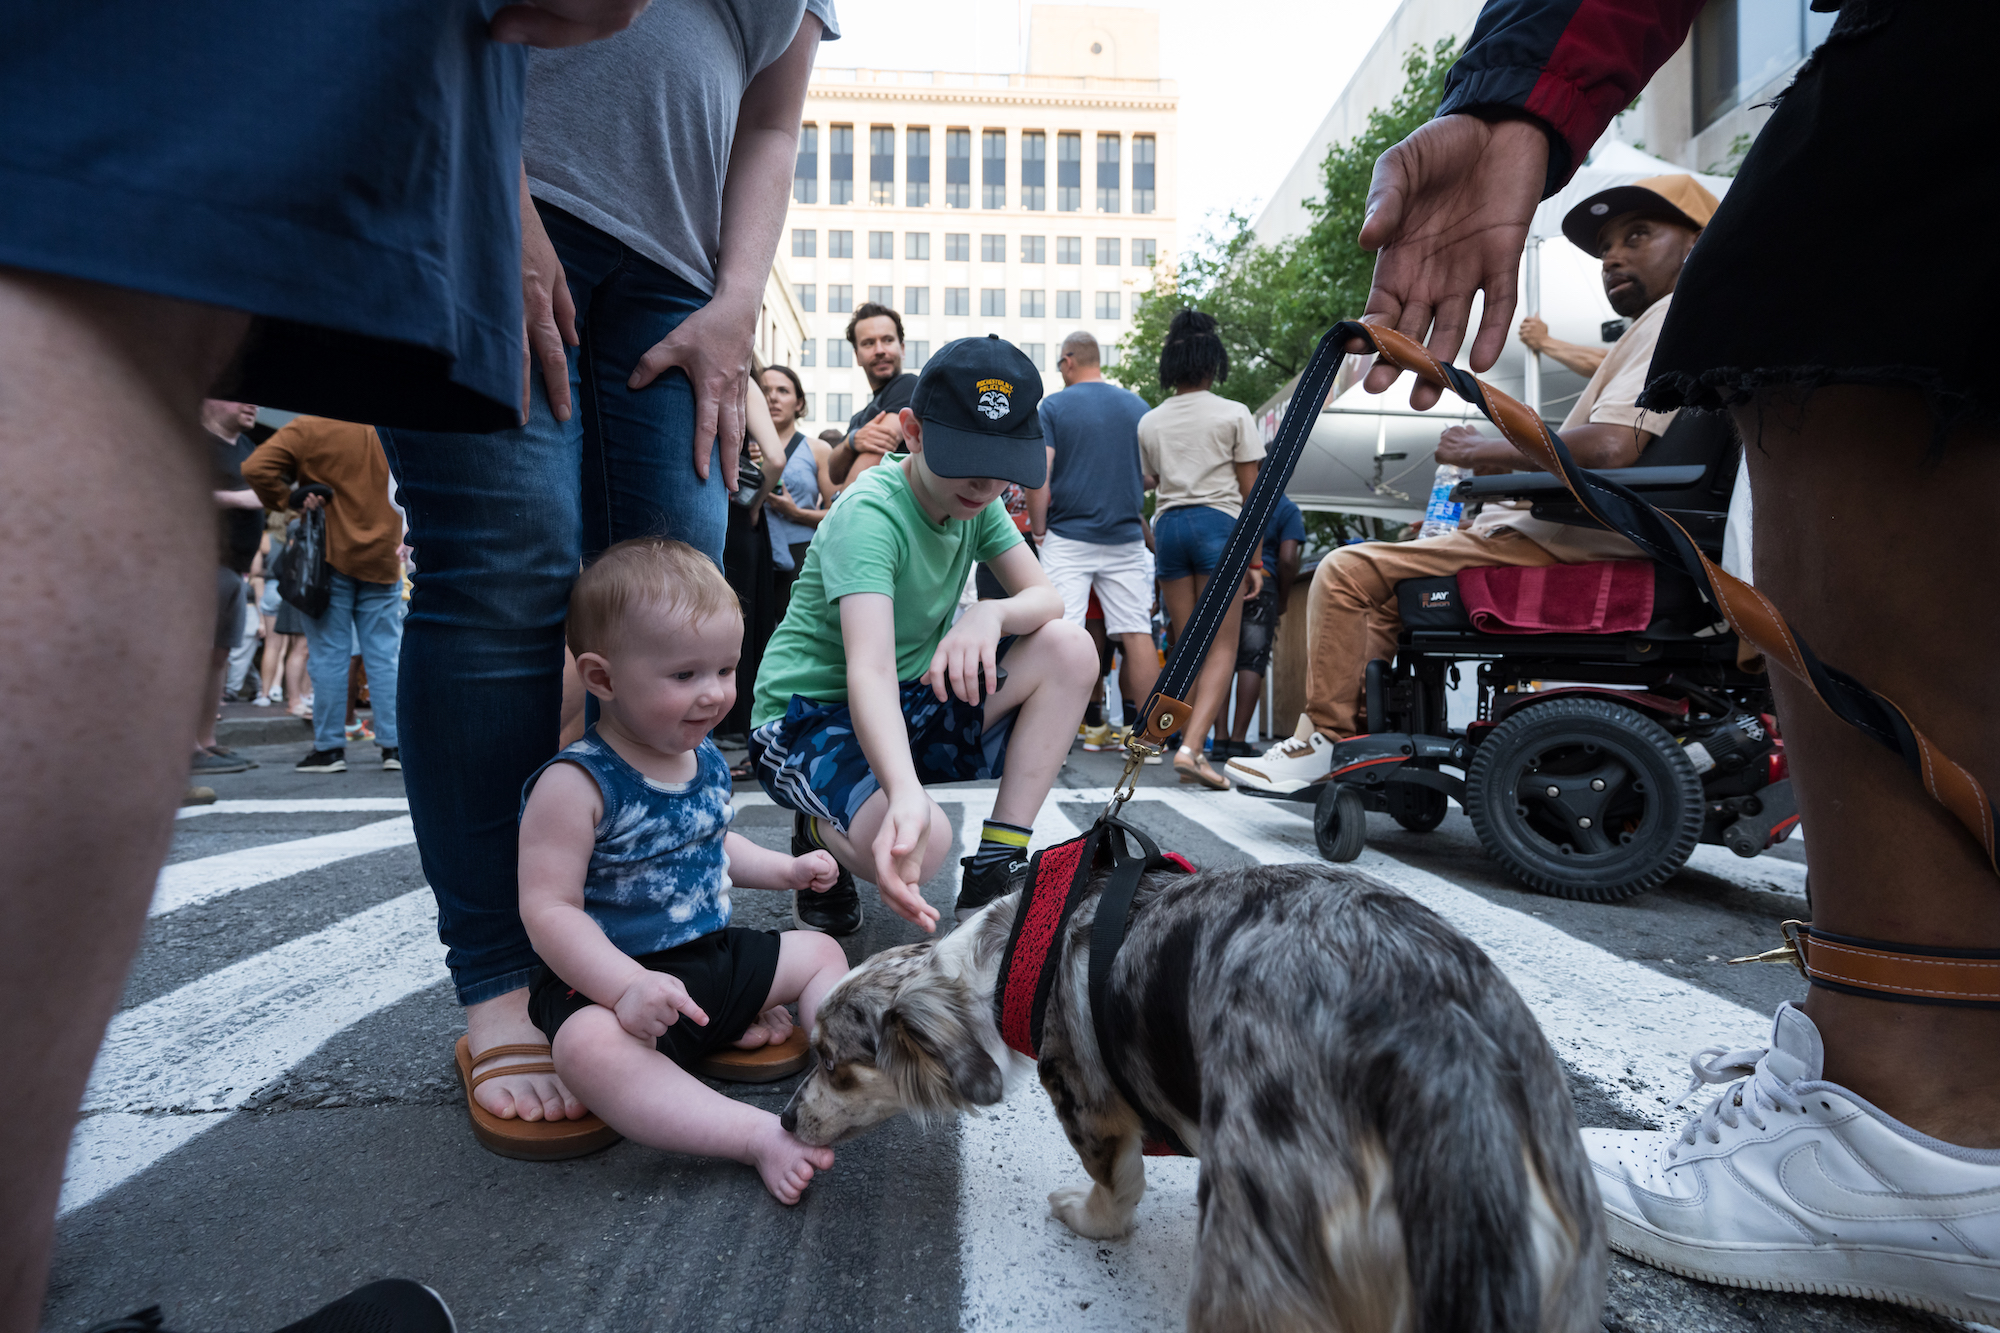 A baby and a small child are pictured with a tiny dog outside among a crowd of people